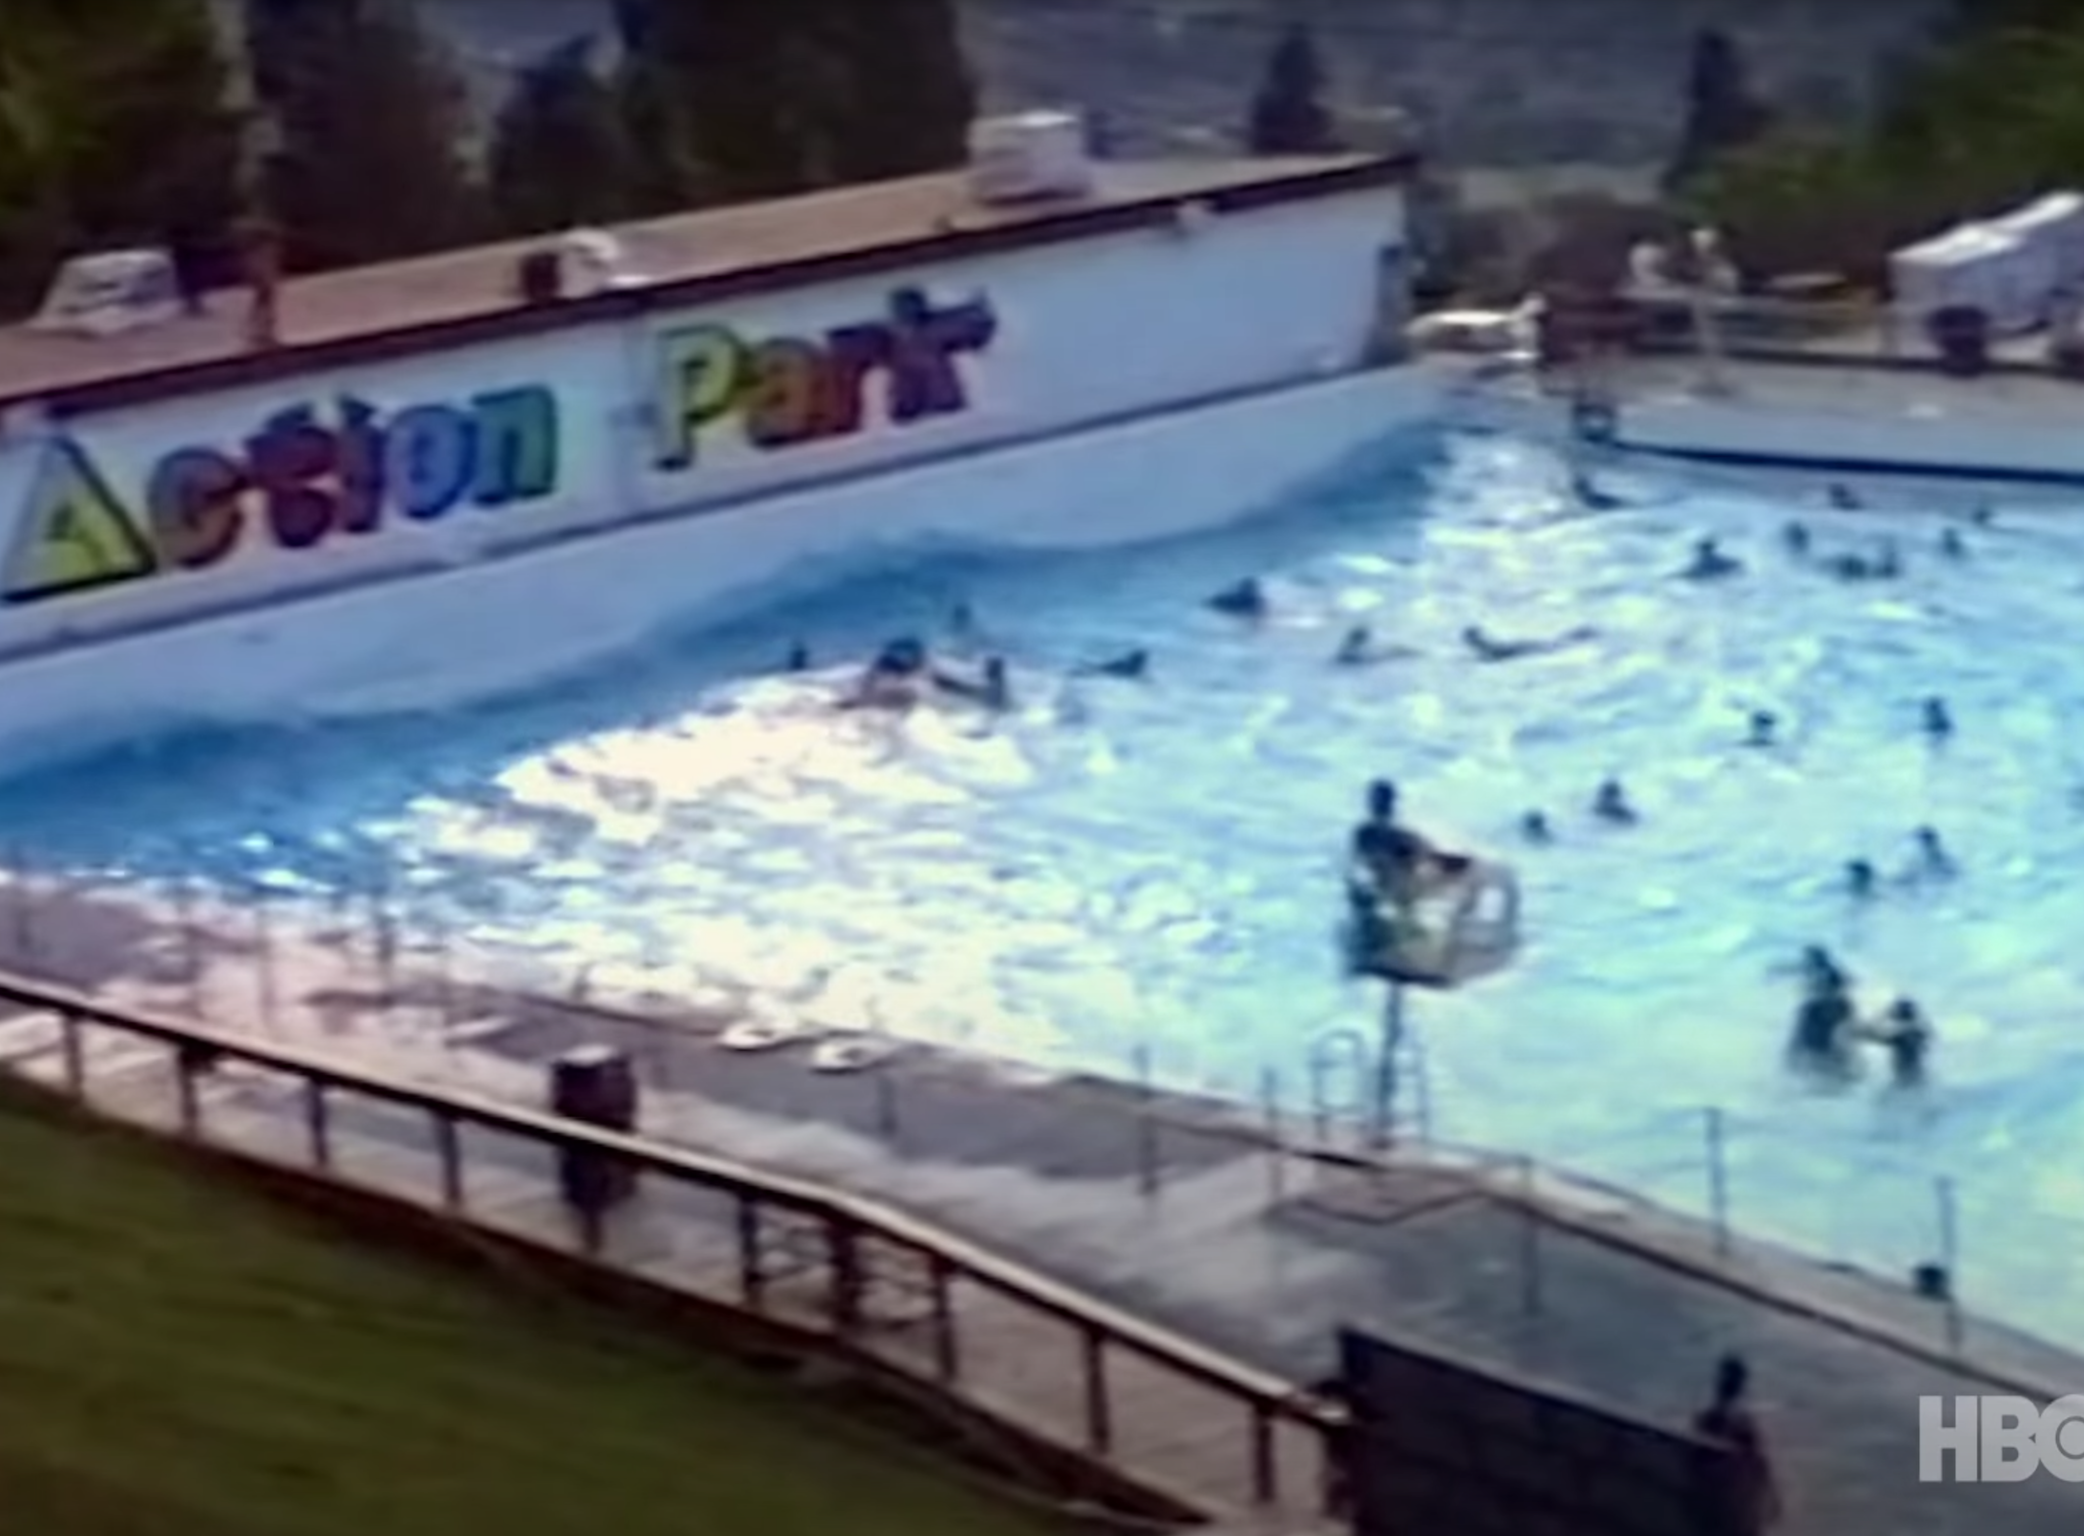 A 15-year-old boy drowned in the park’s Tidal Wave Pool in 1982 (HBO)